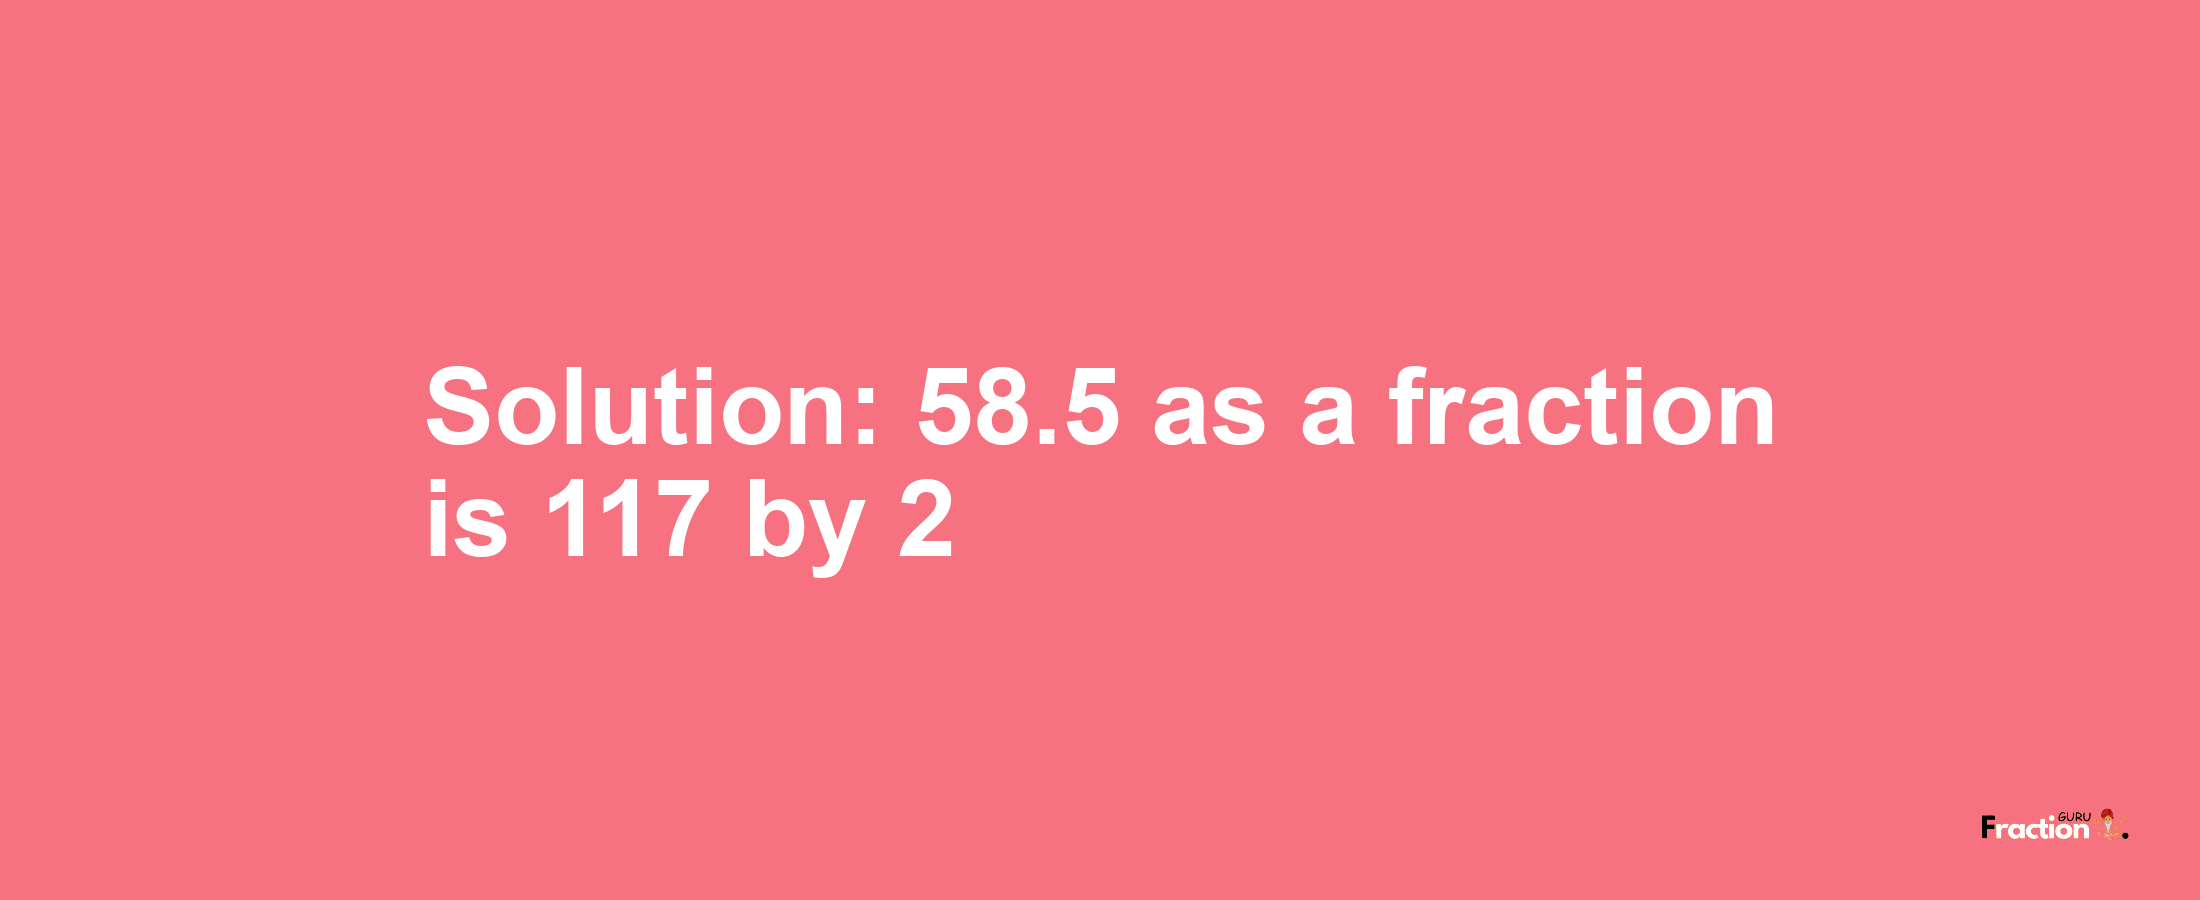 Solution:58.5 as a fraction is 117/2